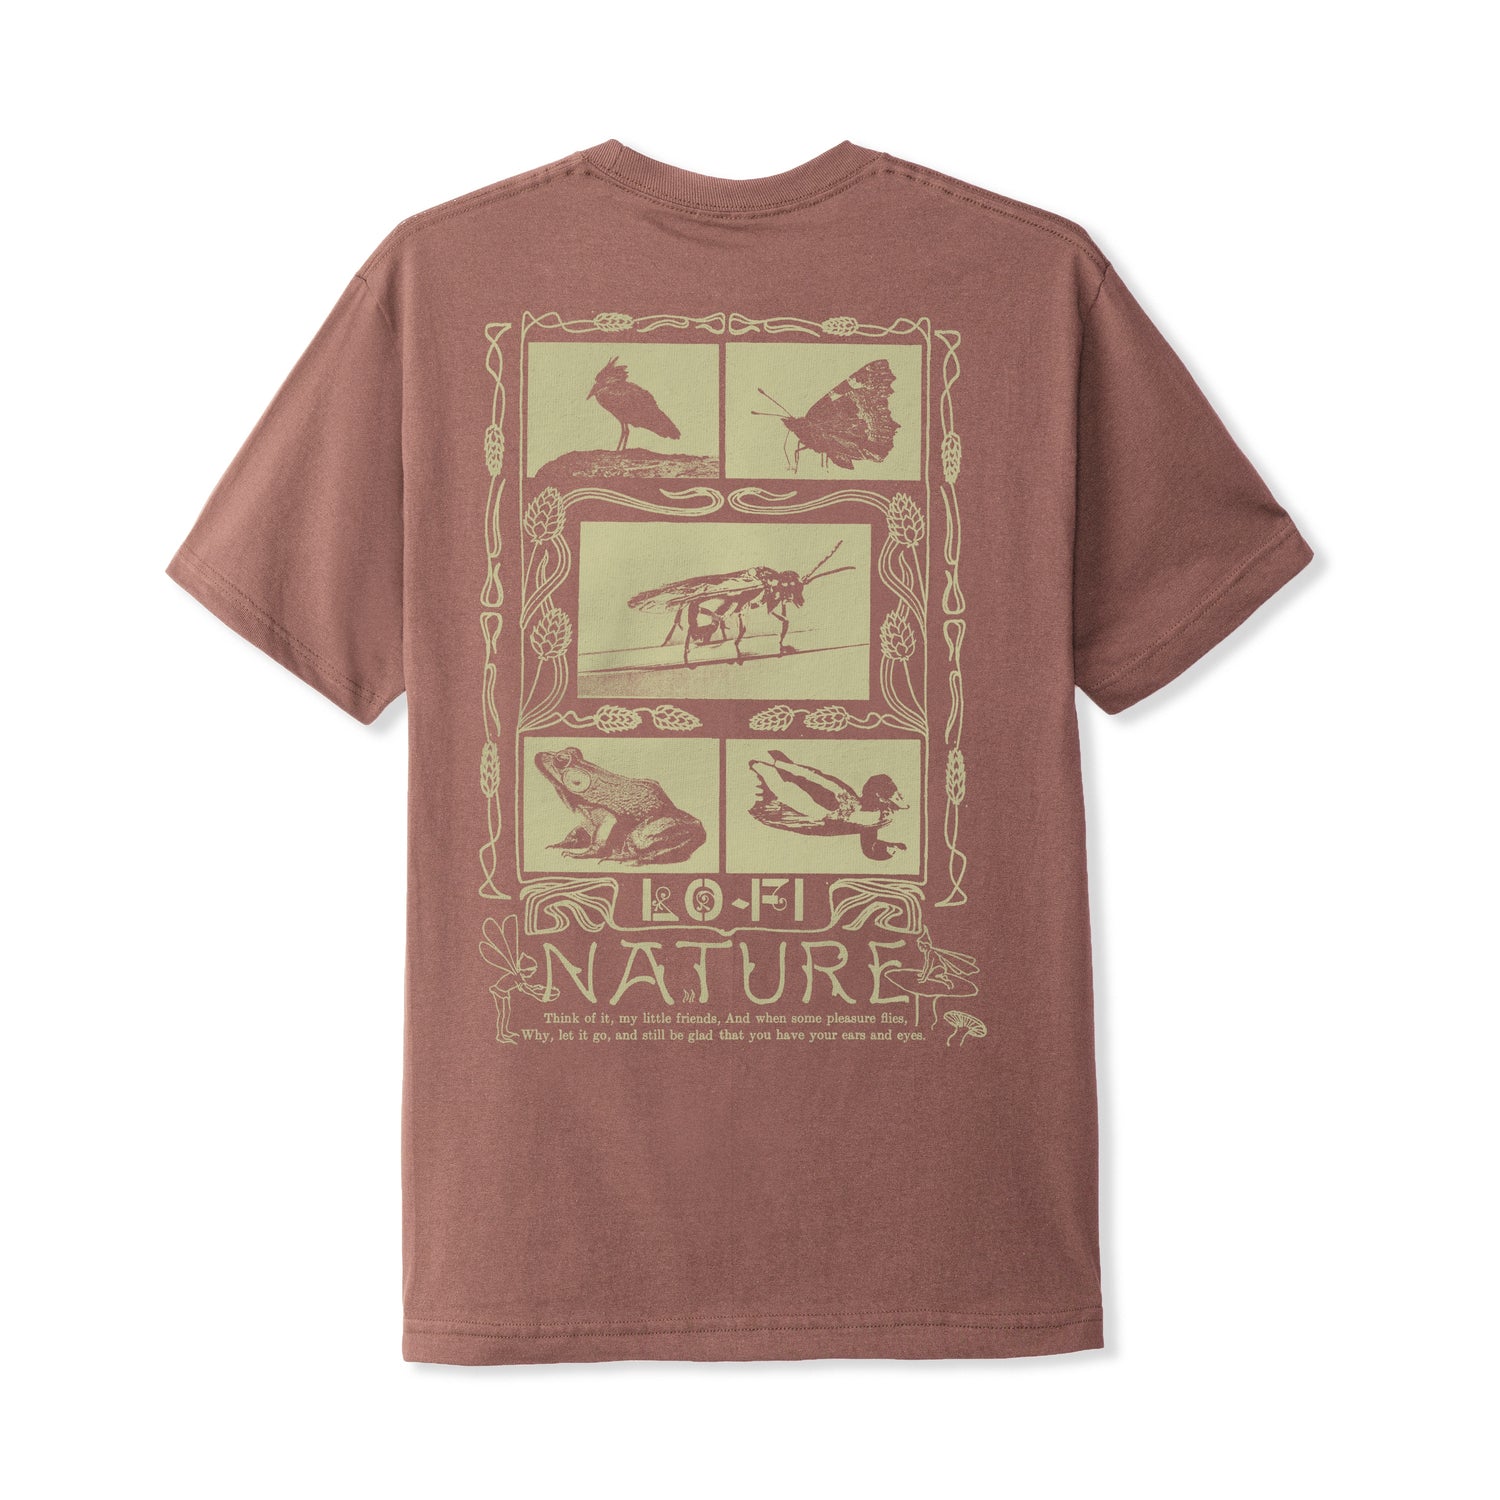 Resources Tee, Washed Wood